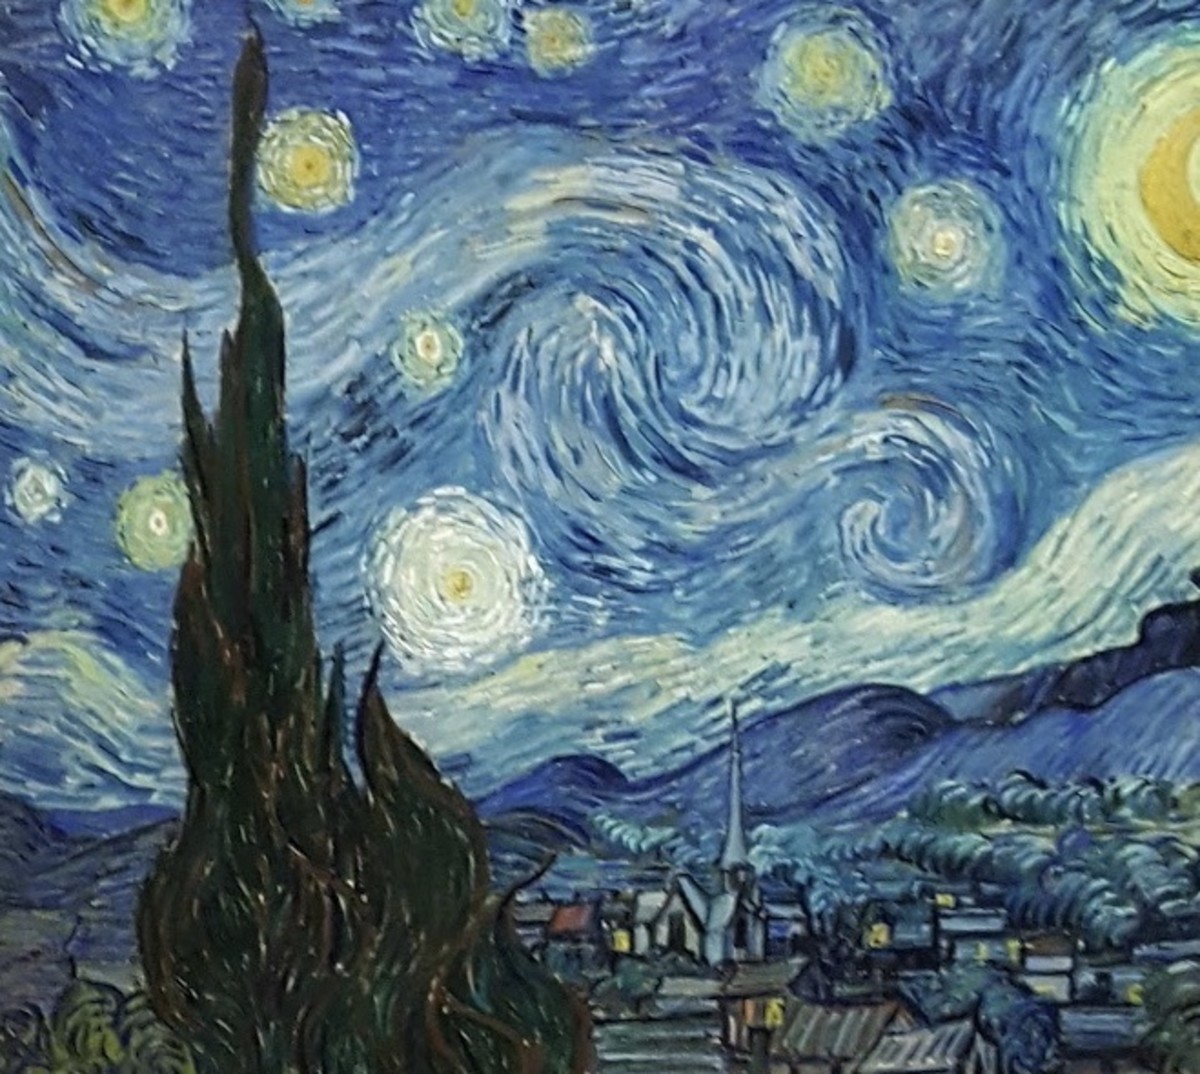 “Starry Night” by Vincent Van Gogh, photographed at MOMA